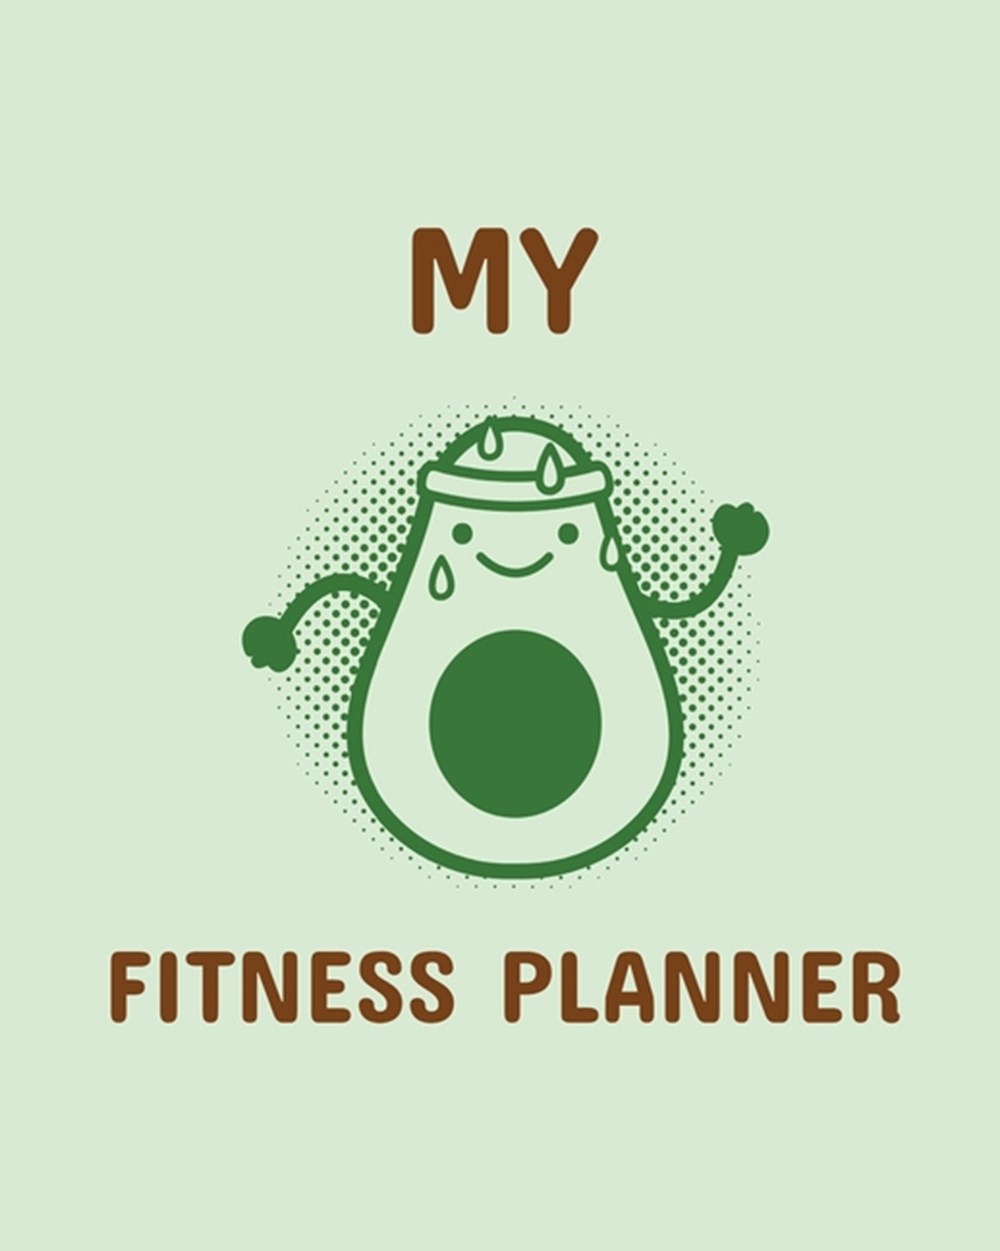 My Fitness Planner: Workout Journal For Women Gym Companion Fitness ActivityTracker Meal Plans Undat